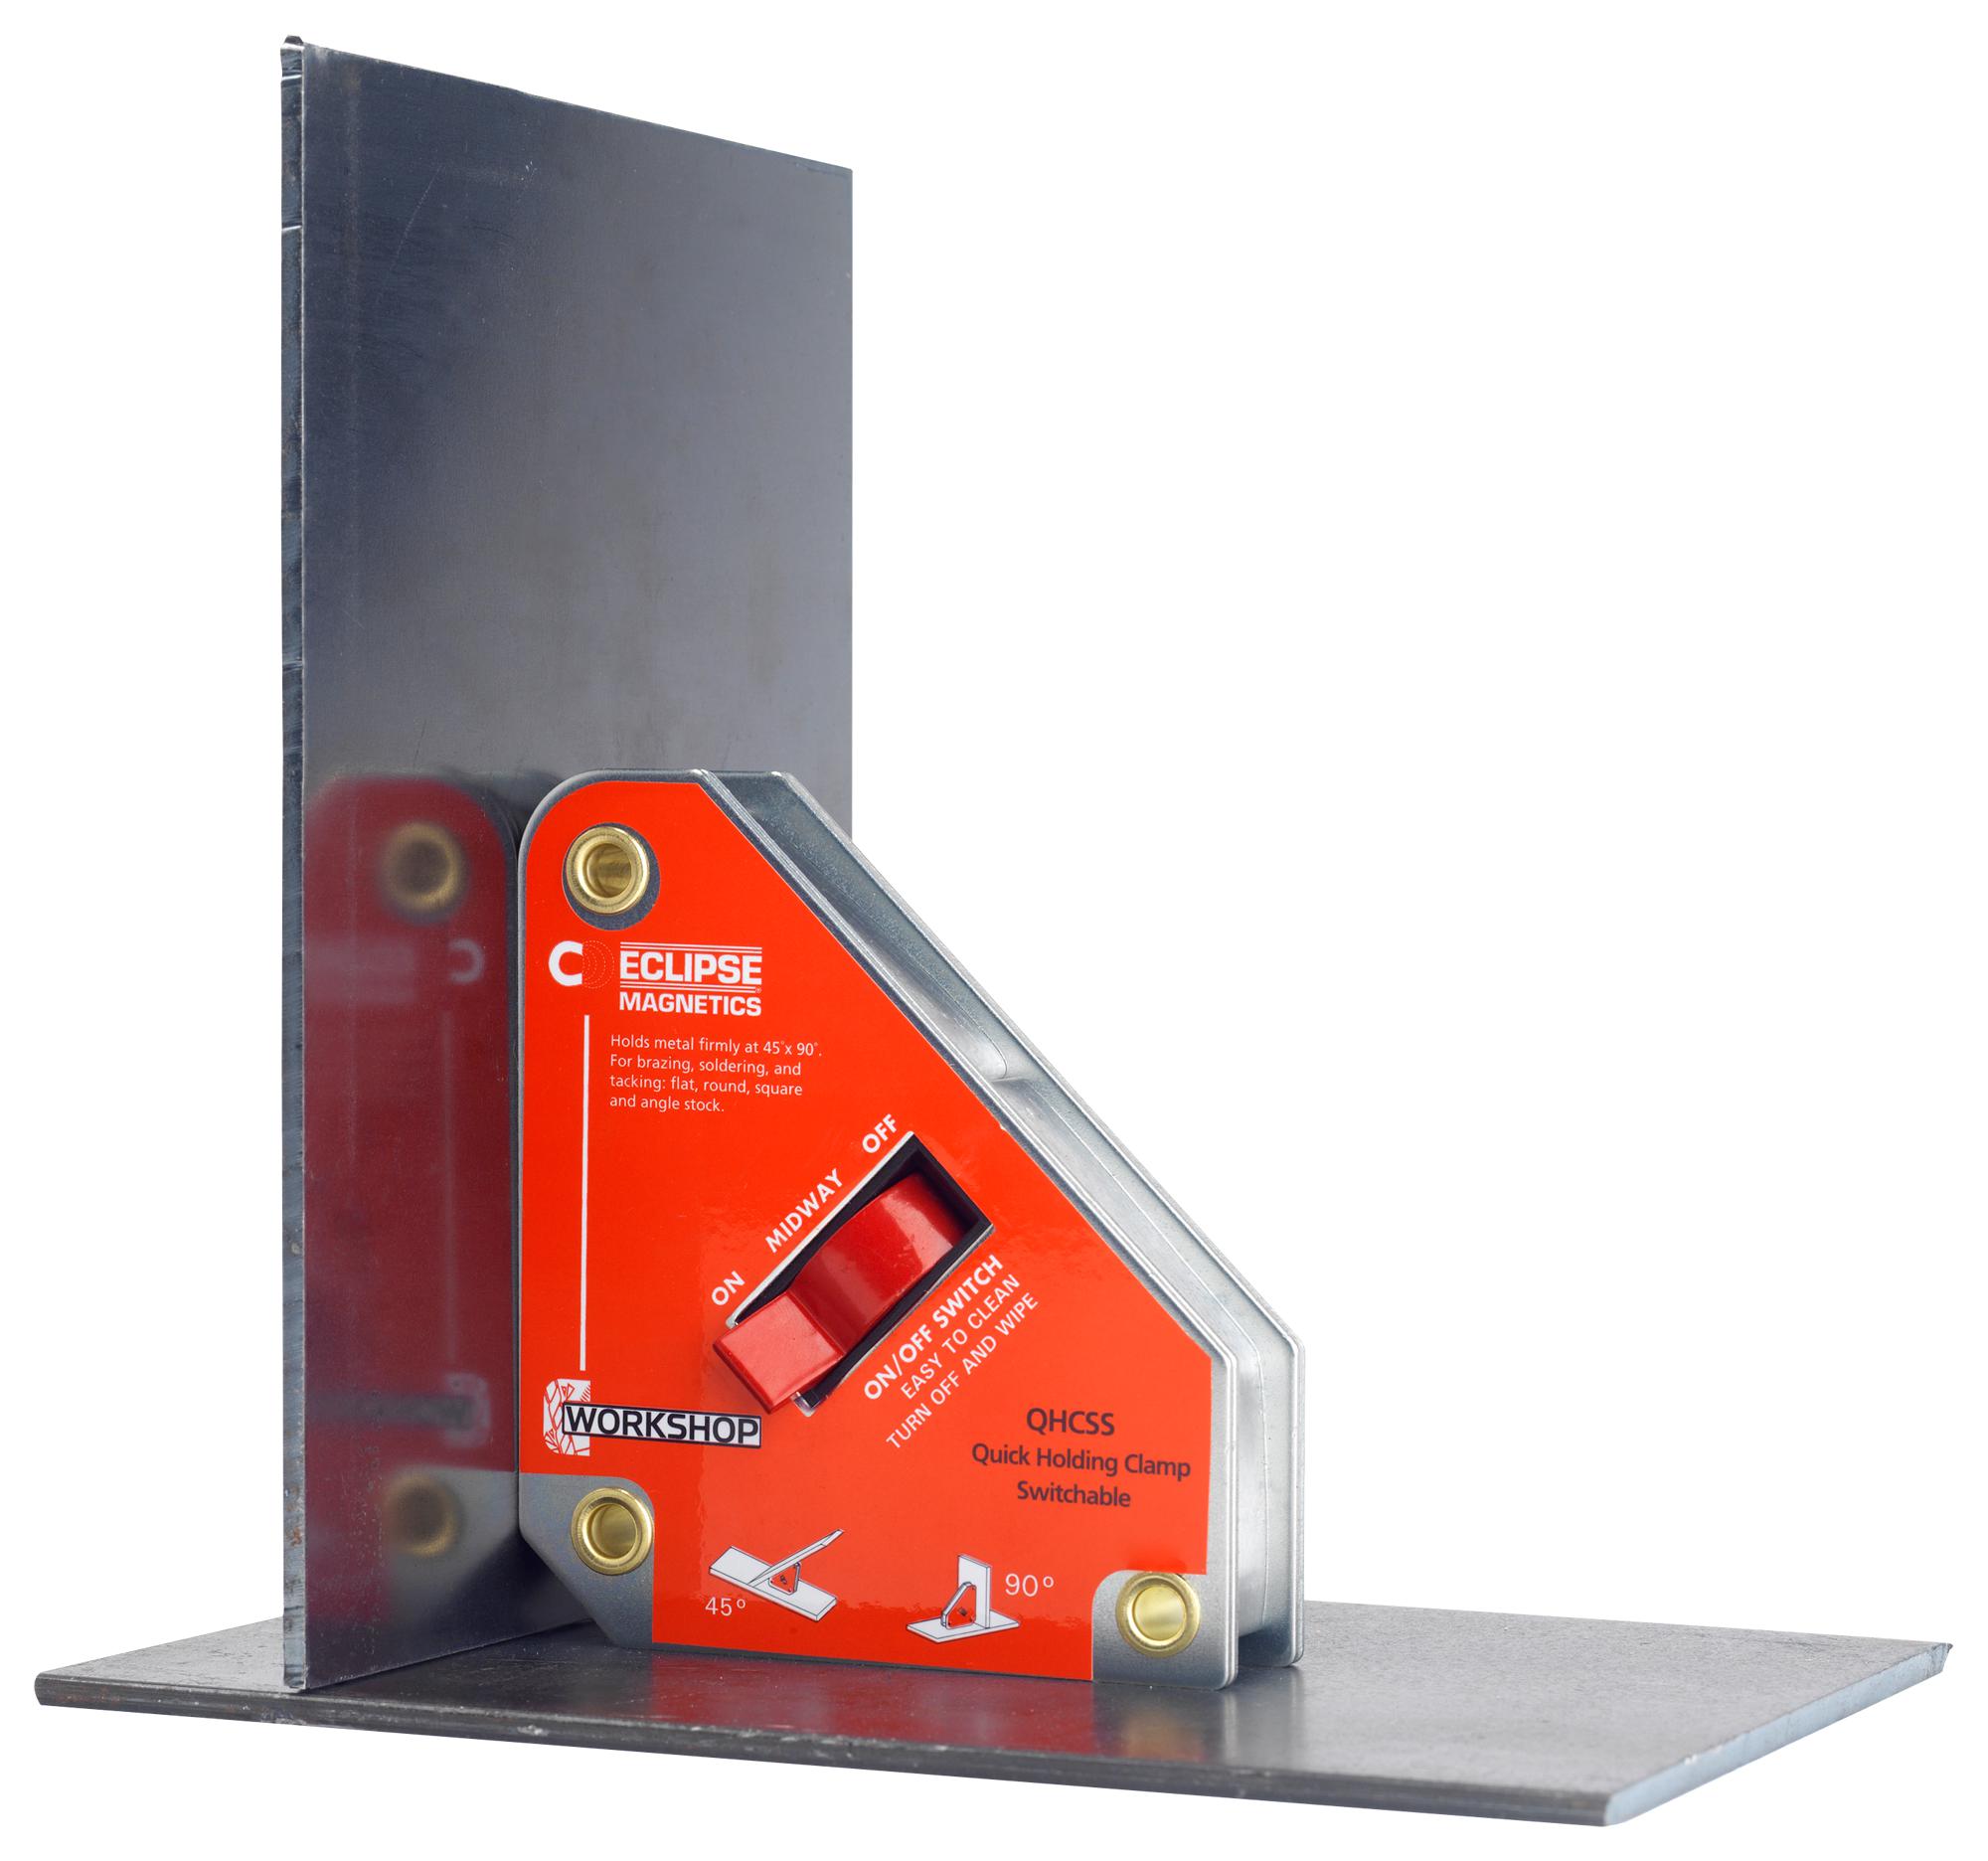 QHCSS SWITCHABLE QUICK HOLDING CLAMP, 700G ECLIPSE MAGNETICS